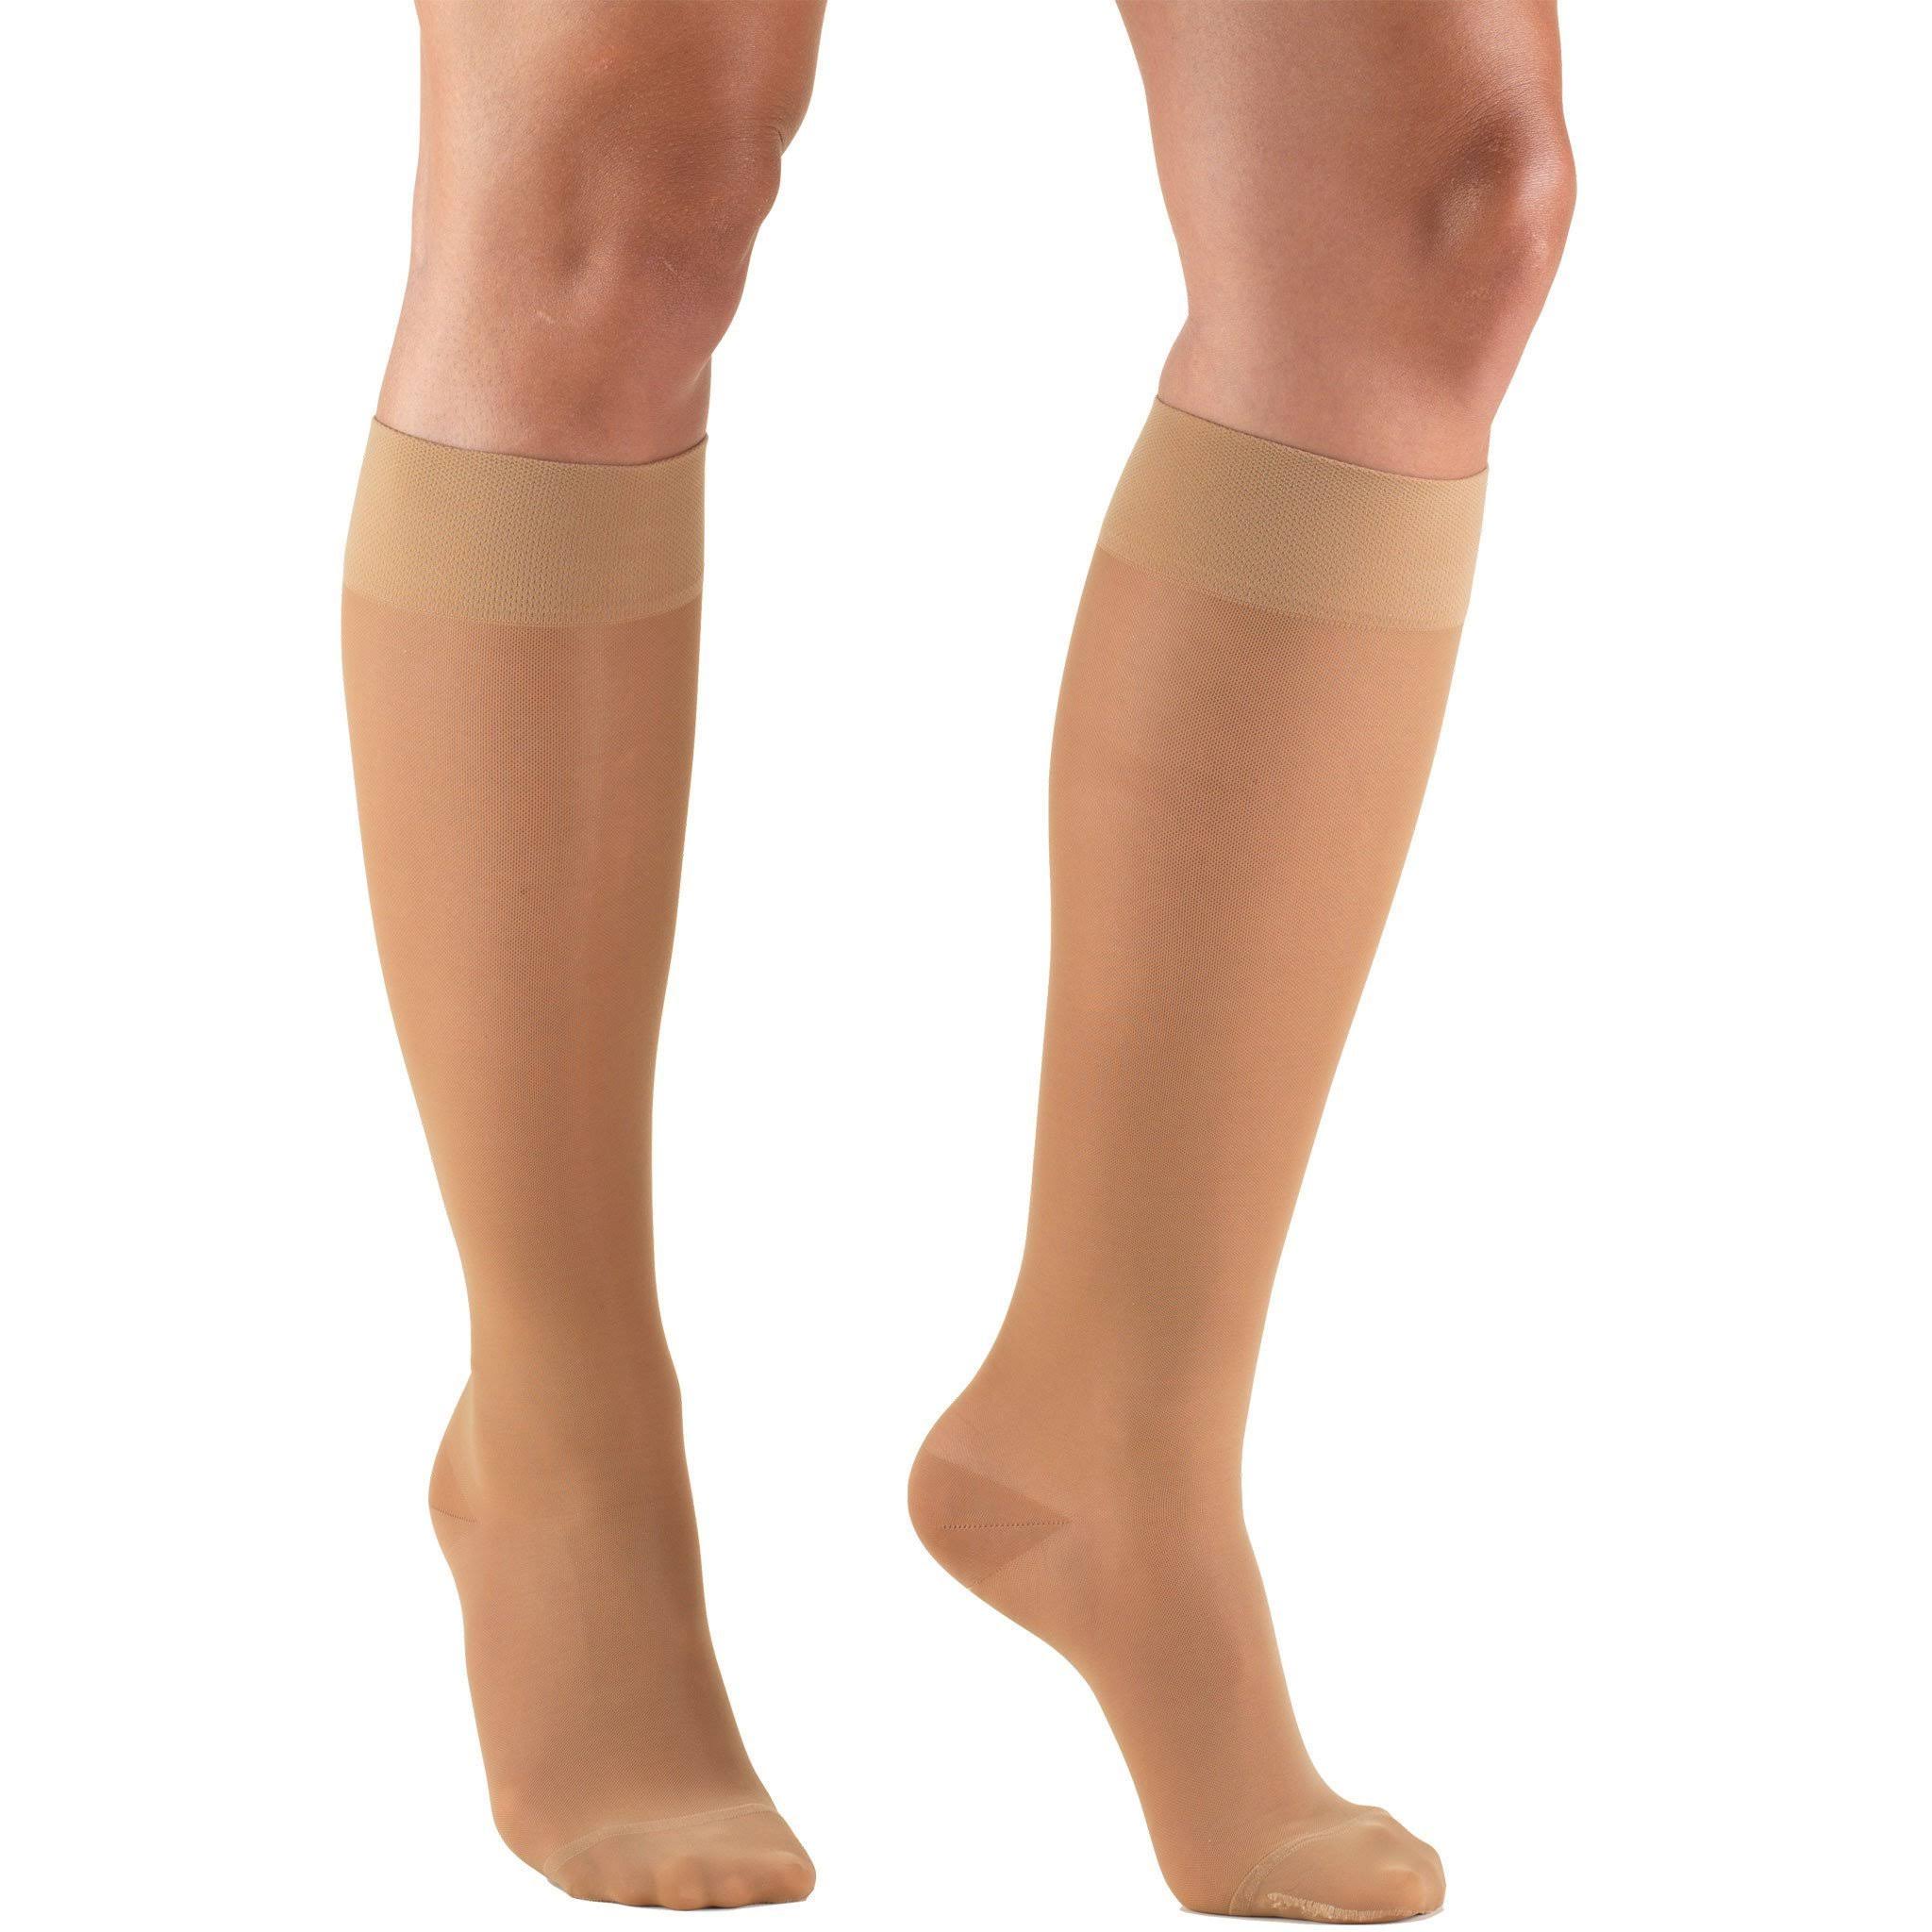 Truform 1773 Womens Compression Stockings - Knee High, Sheer, 15 to 20mmHg, X-Large, Beige